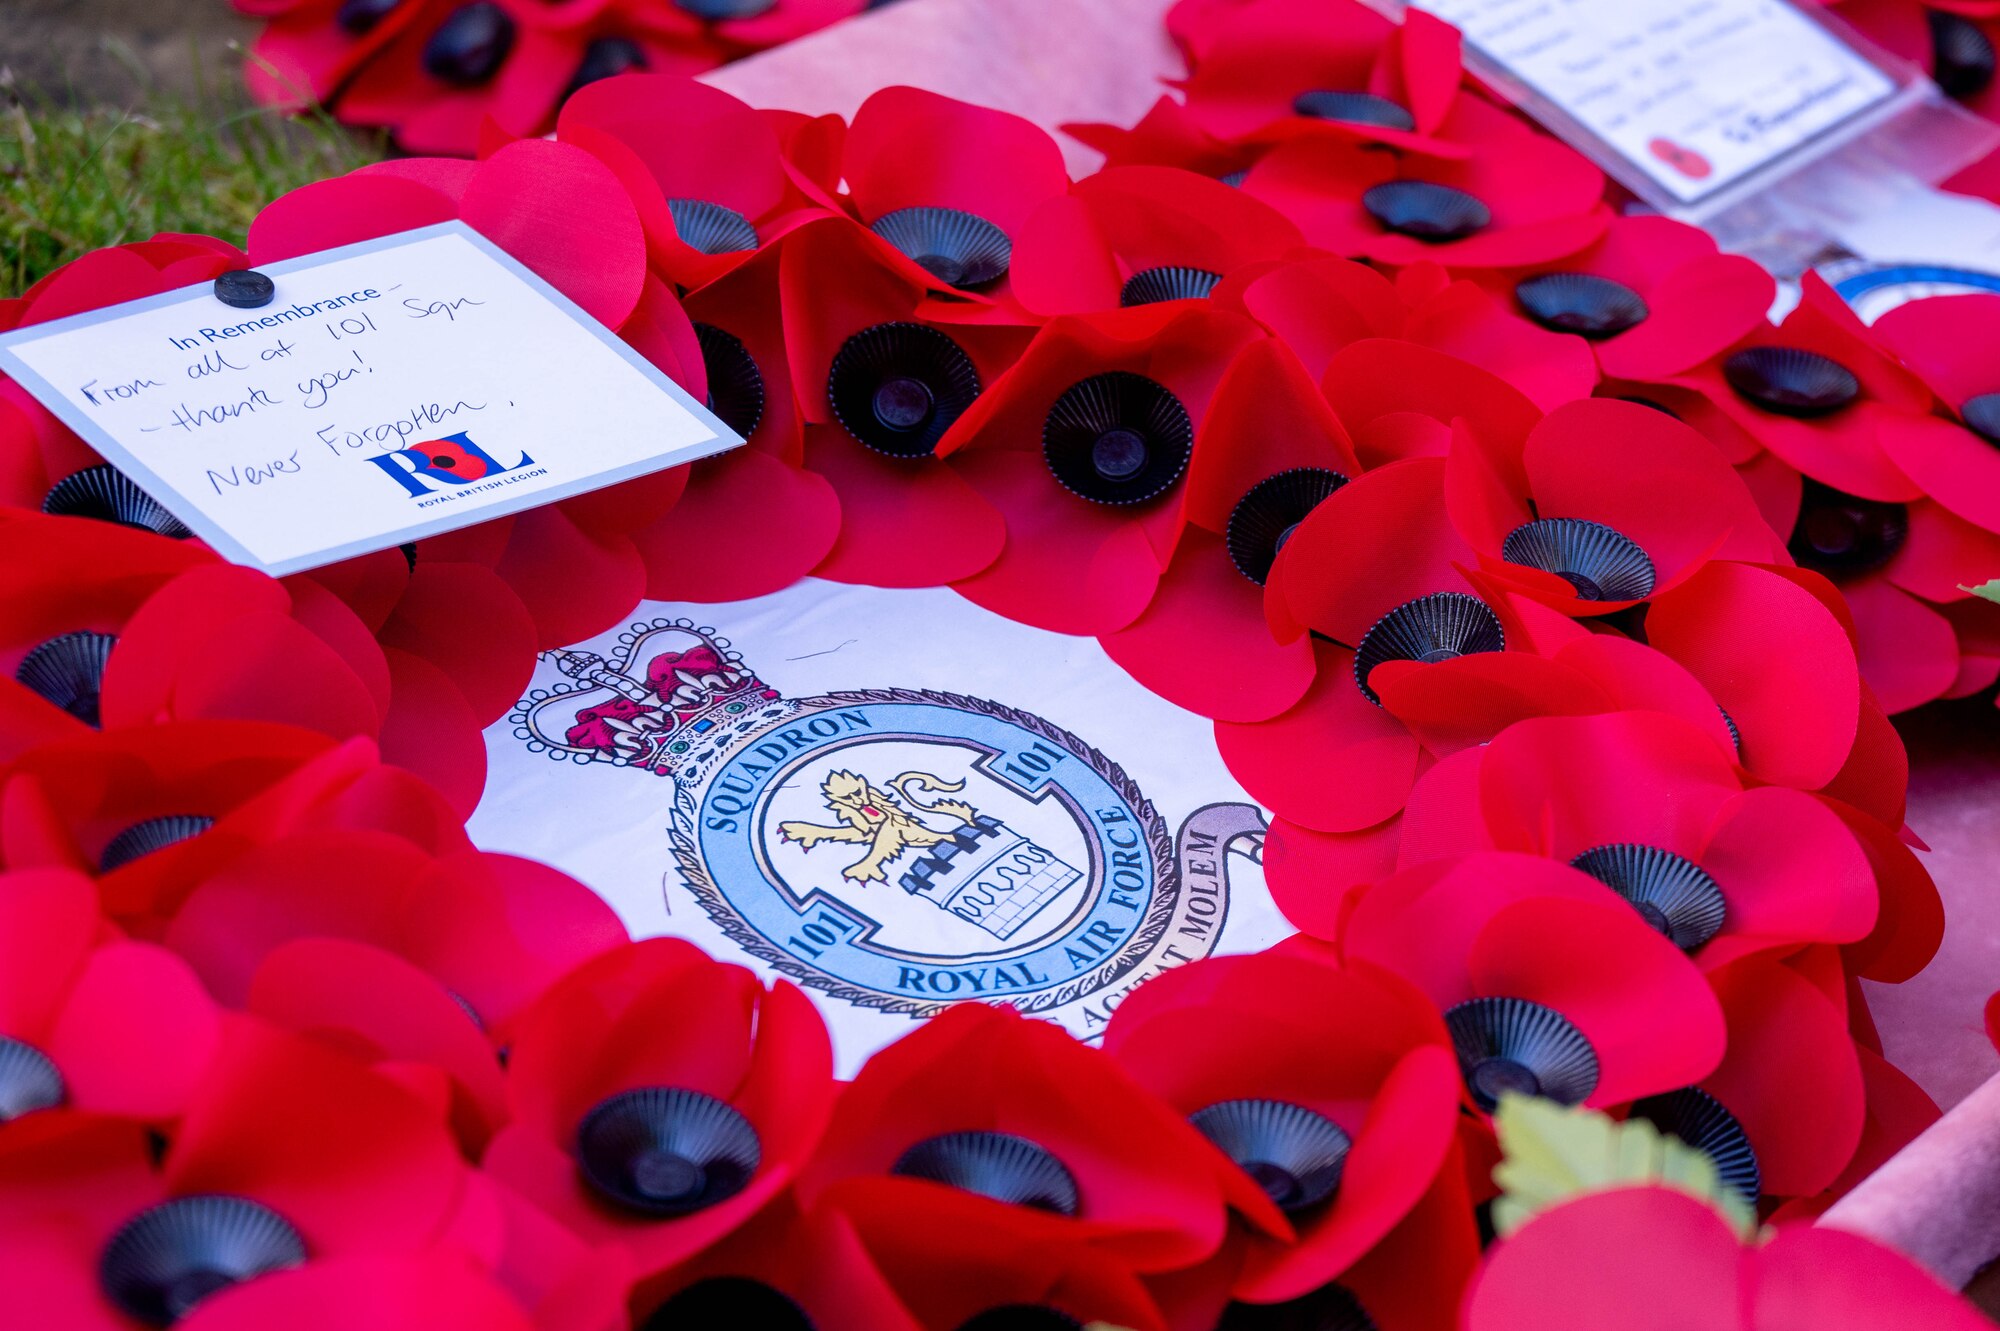 A poppy wreath lays as a tribute during a Remembrance Day ceremony.